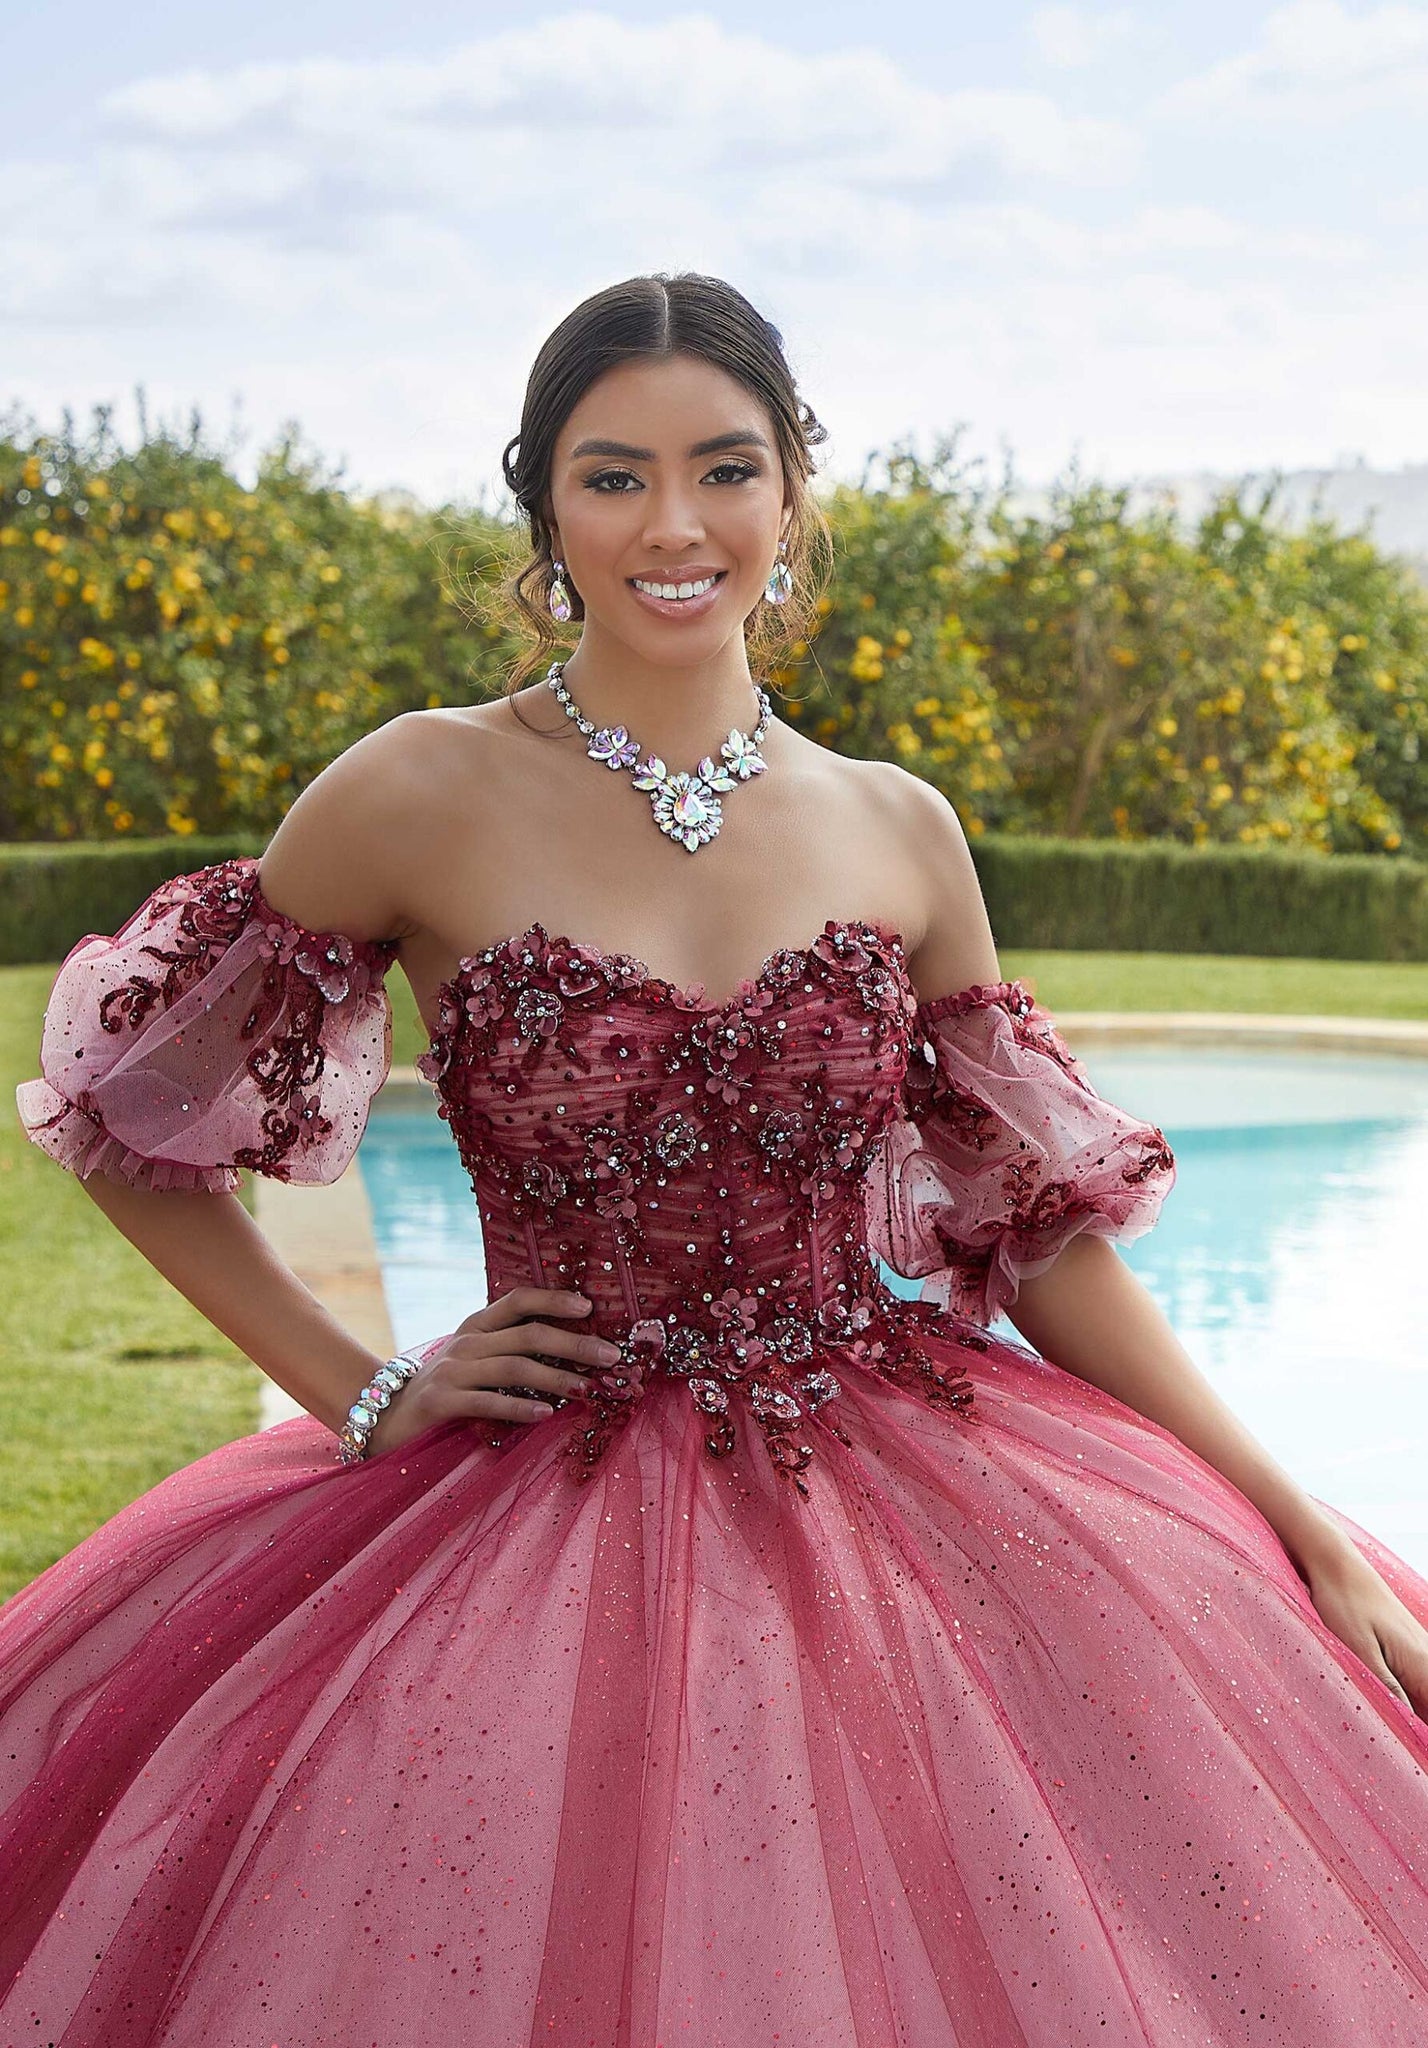 Three-Dimensional Floral Quinceañera Dress with Corset Bodice